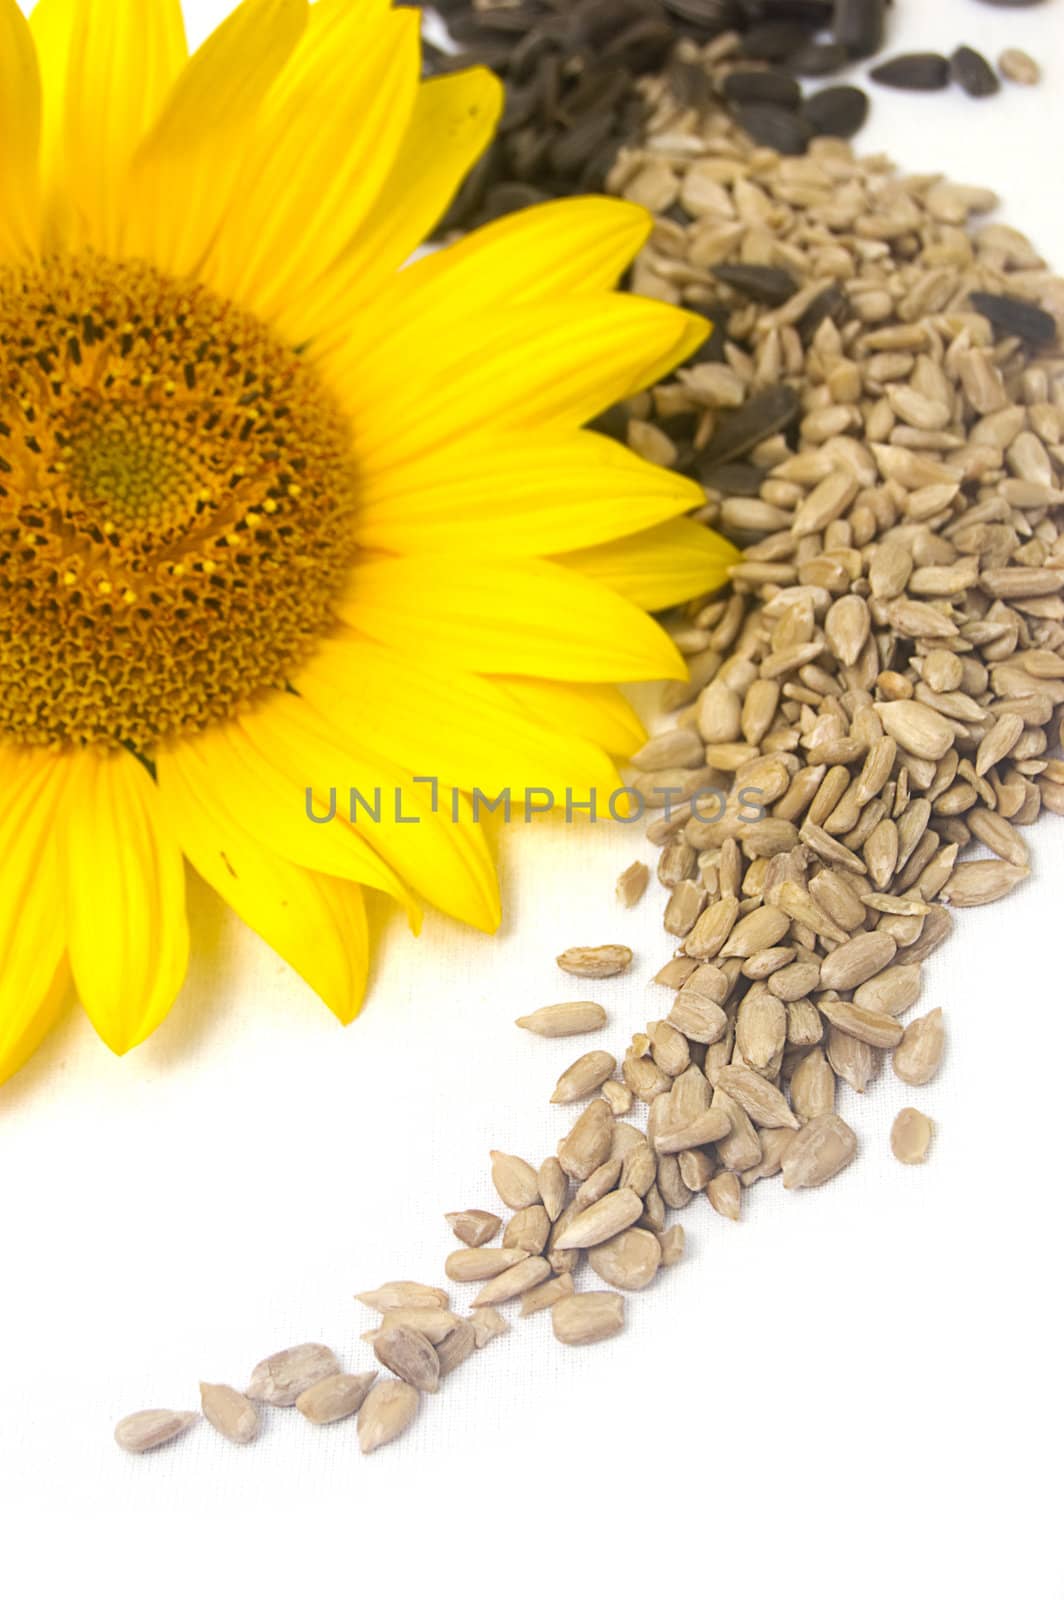 Sunflower seeds by Angel_a